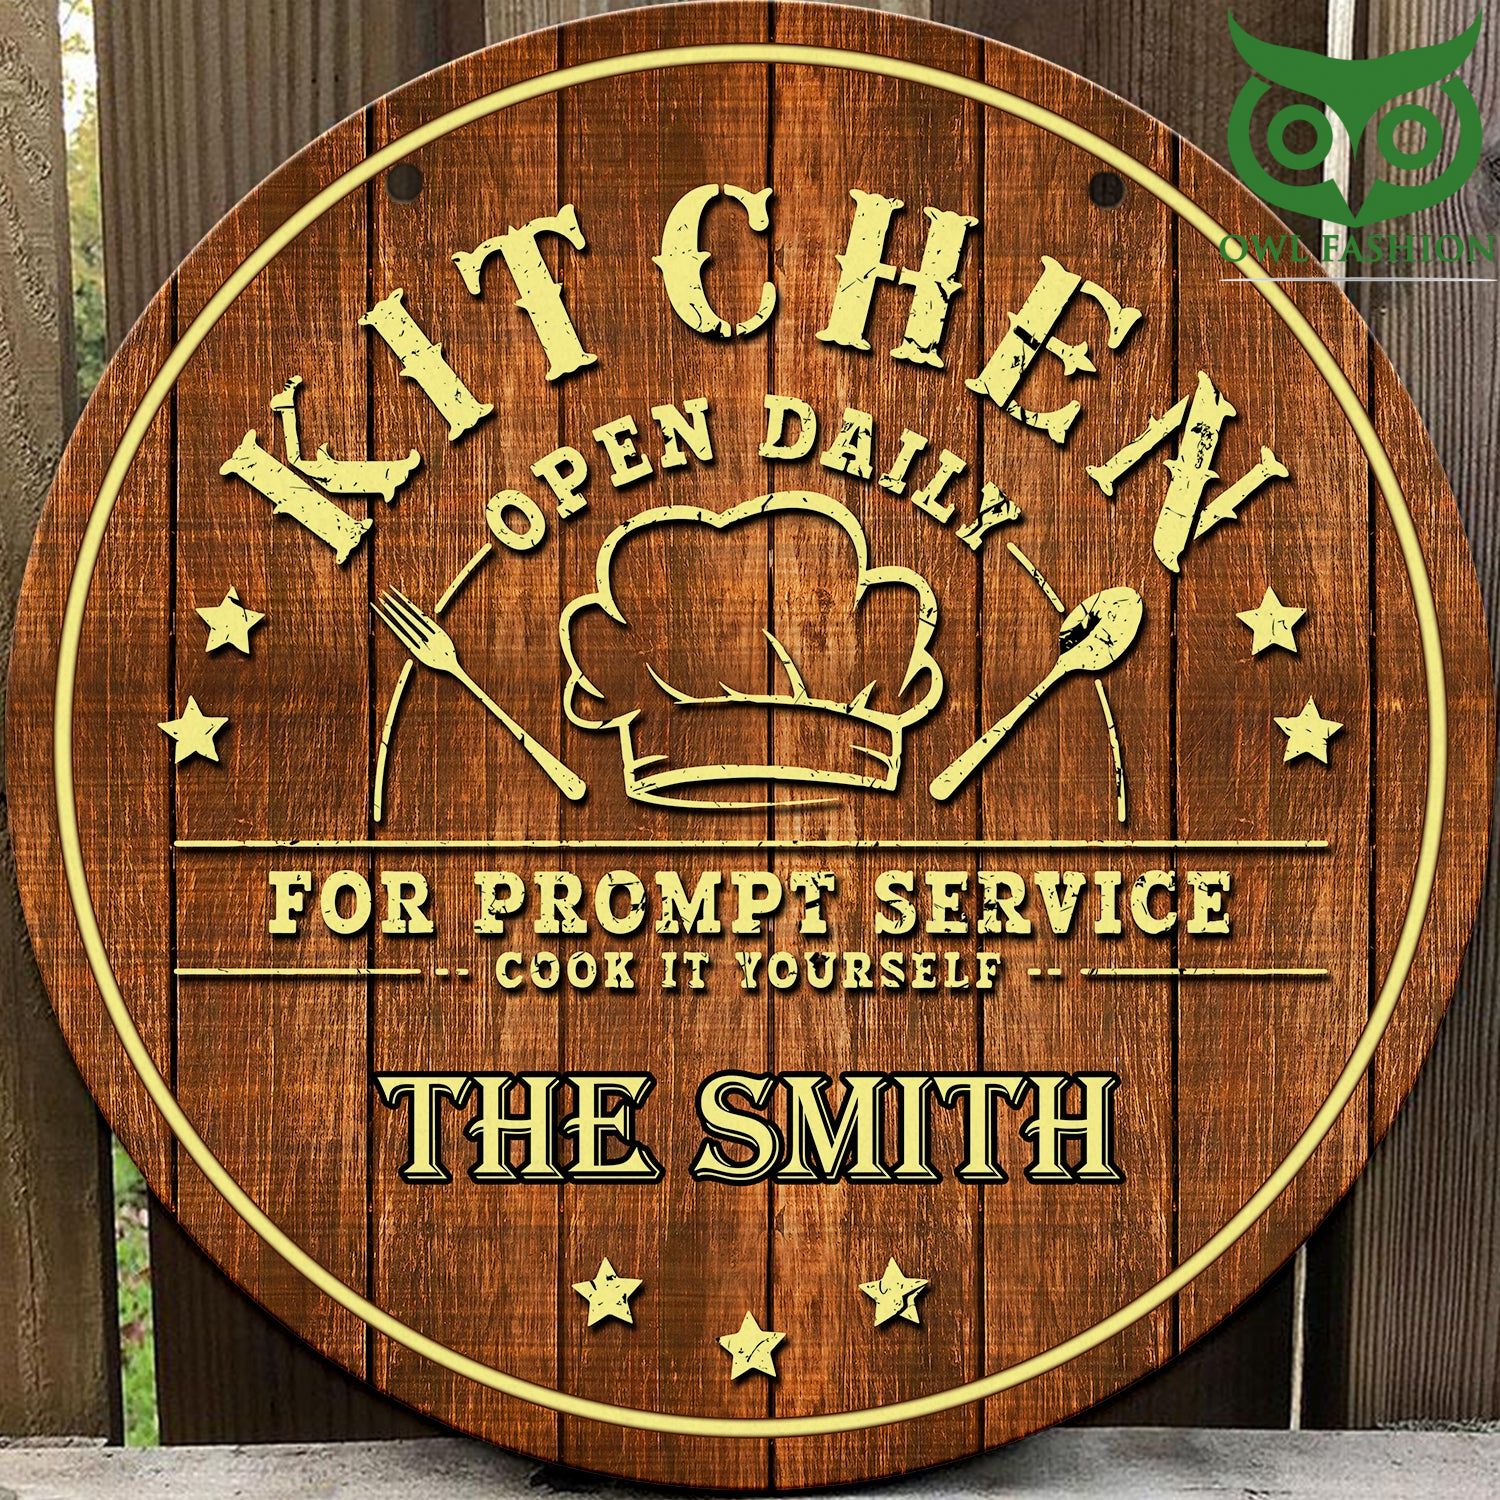 100 Chef Kitchen open daily personalized wood sign